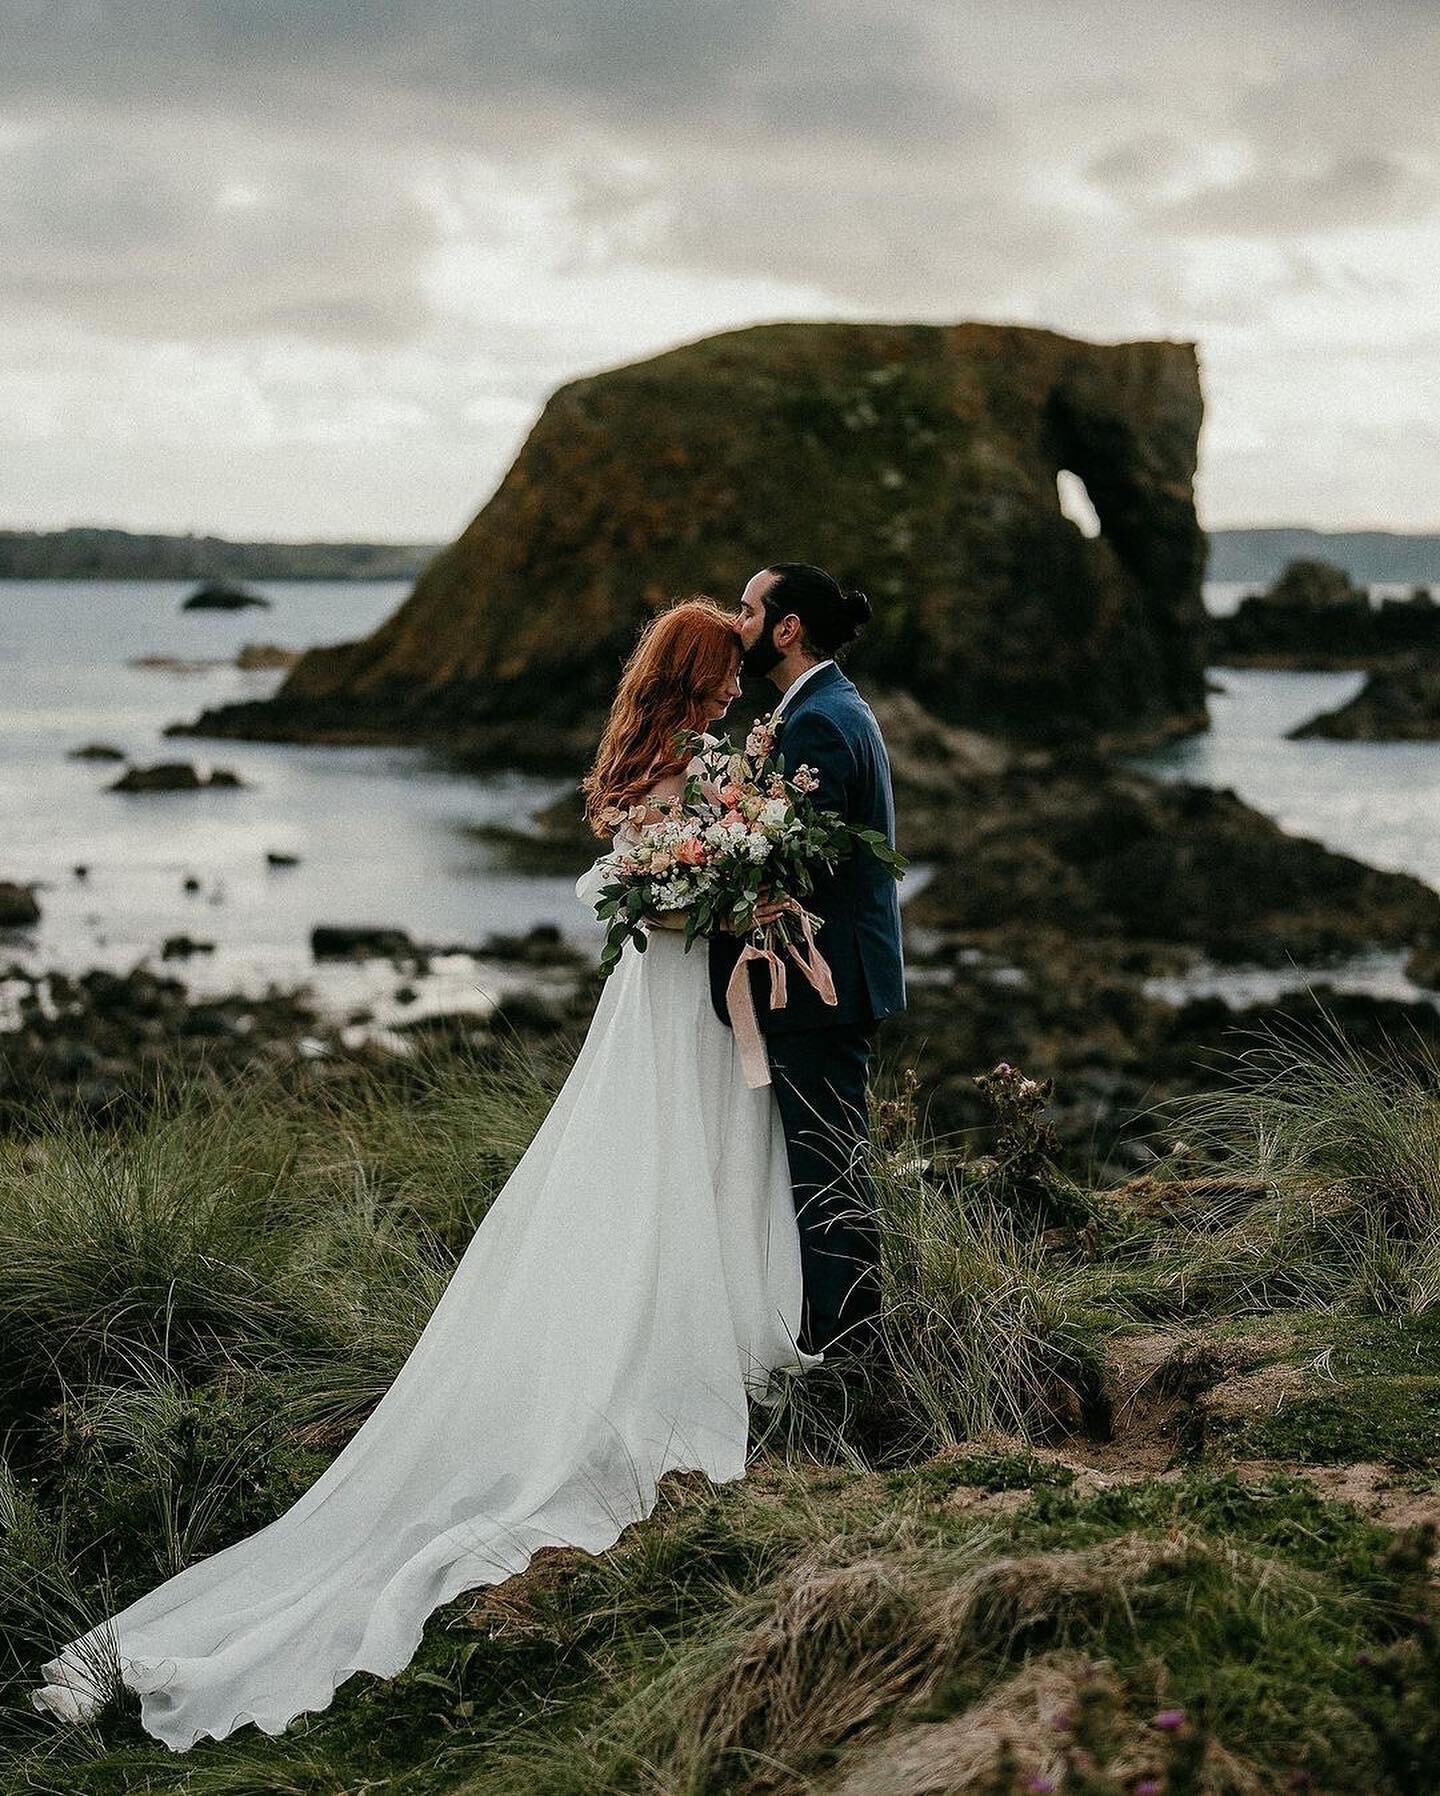 Arman &amp; Marissa travelled from Texas to our beautiful north coast, where they made their vows to each other and @robdight captured these incredible images. 

They spent their wedding day exploring incredible scenery, this first spot was used in t